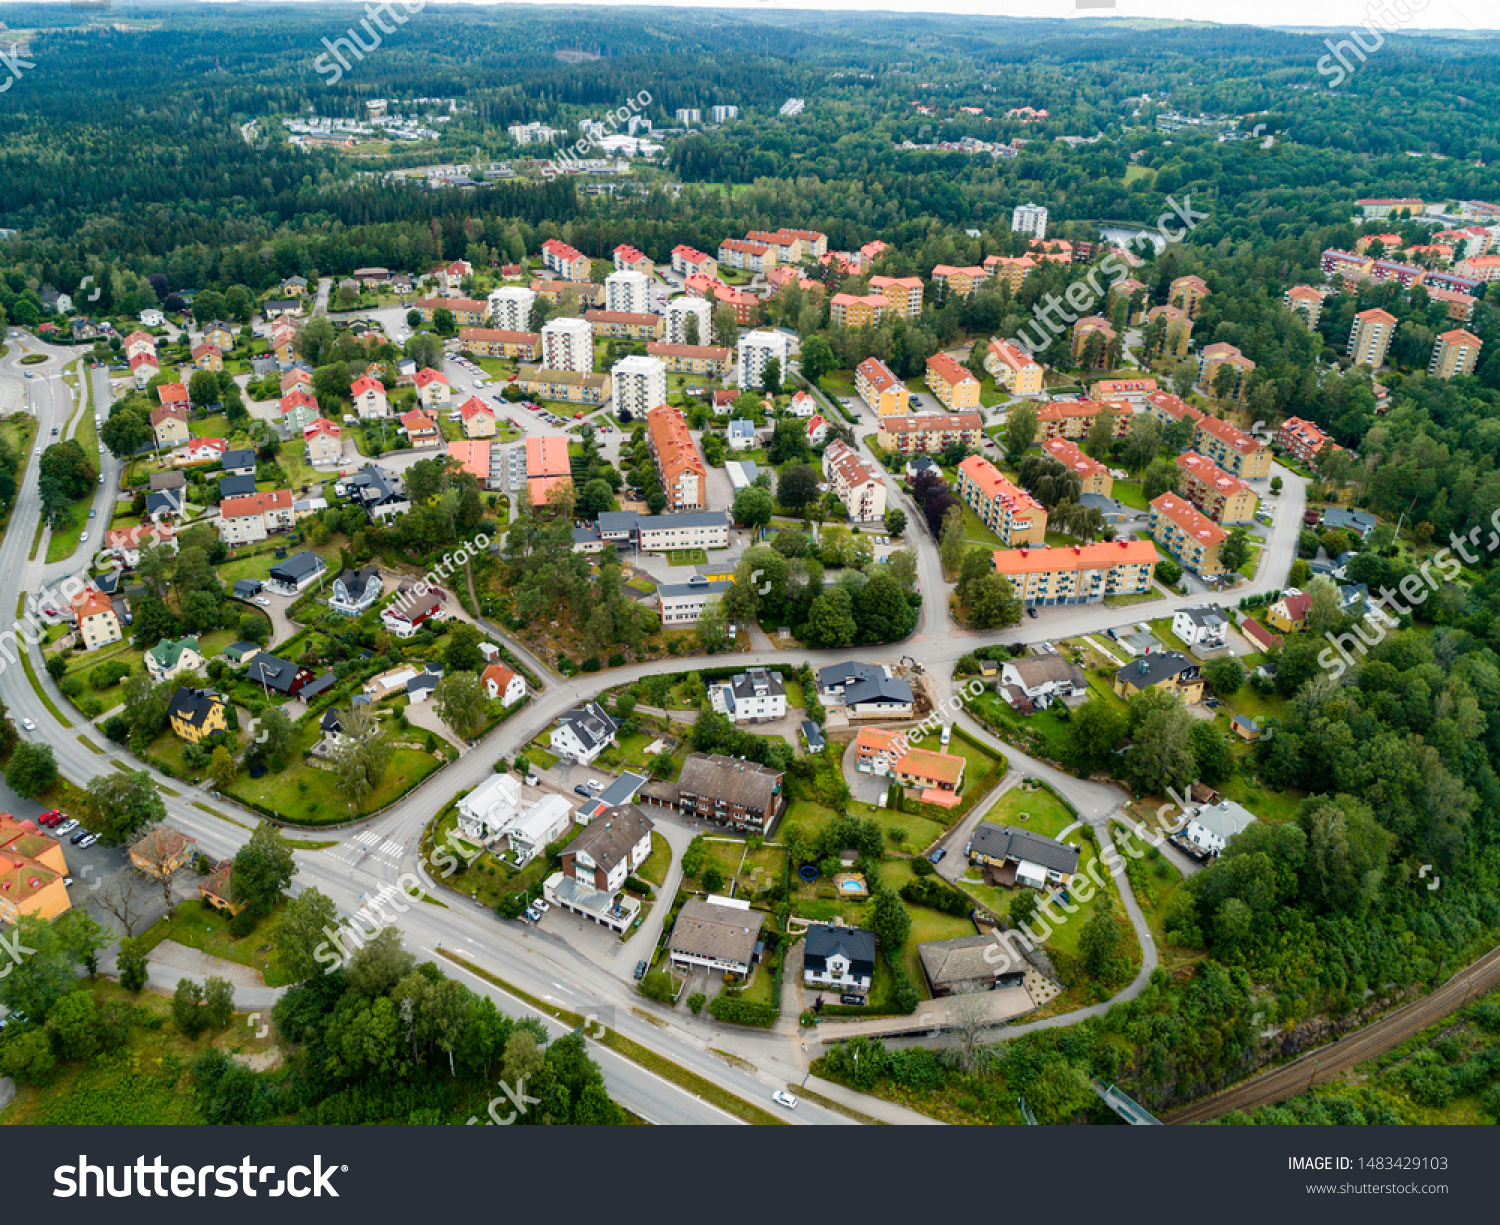 The town Boras from above august 2019 #1483429103